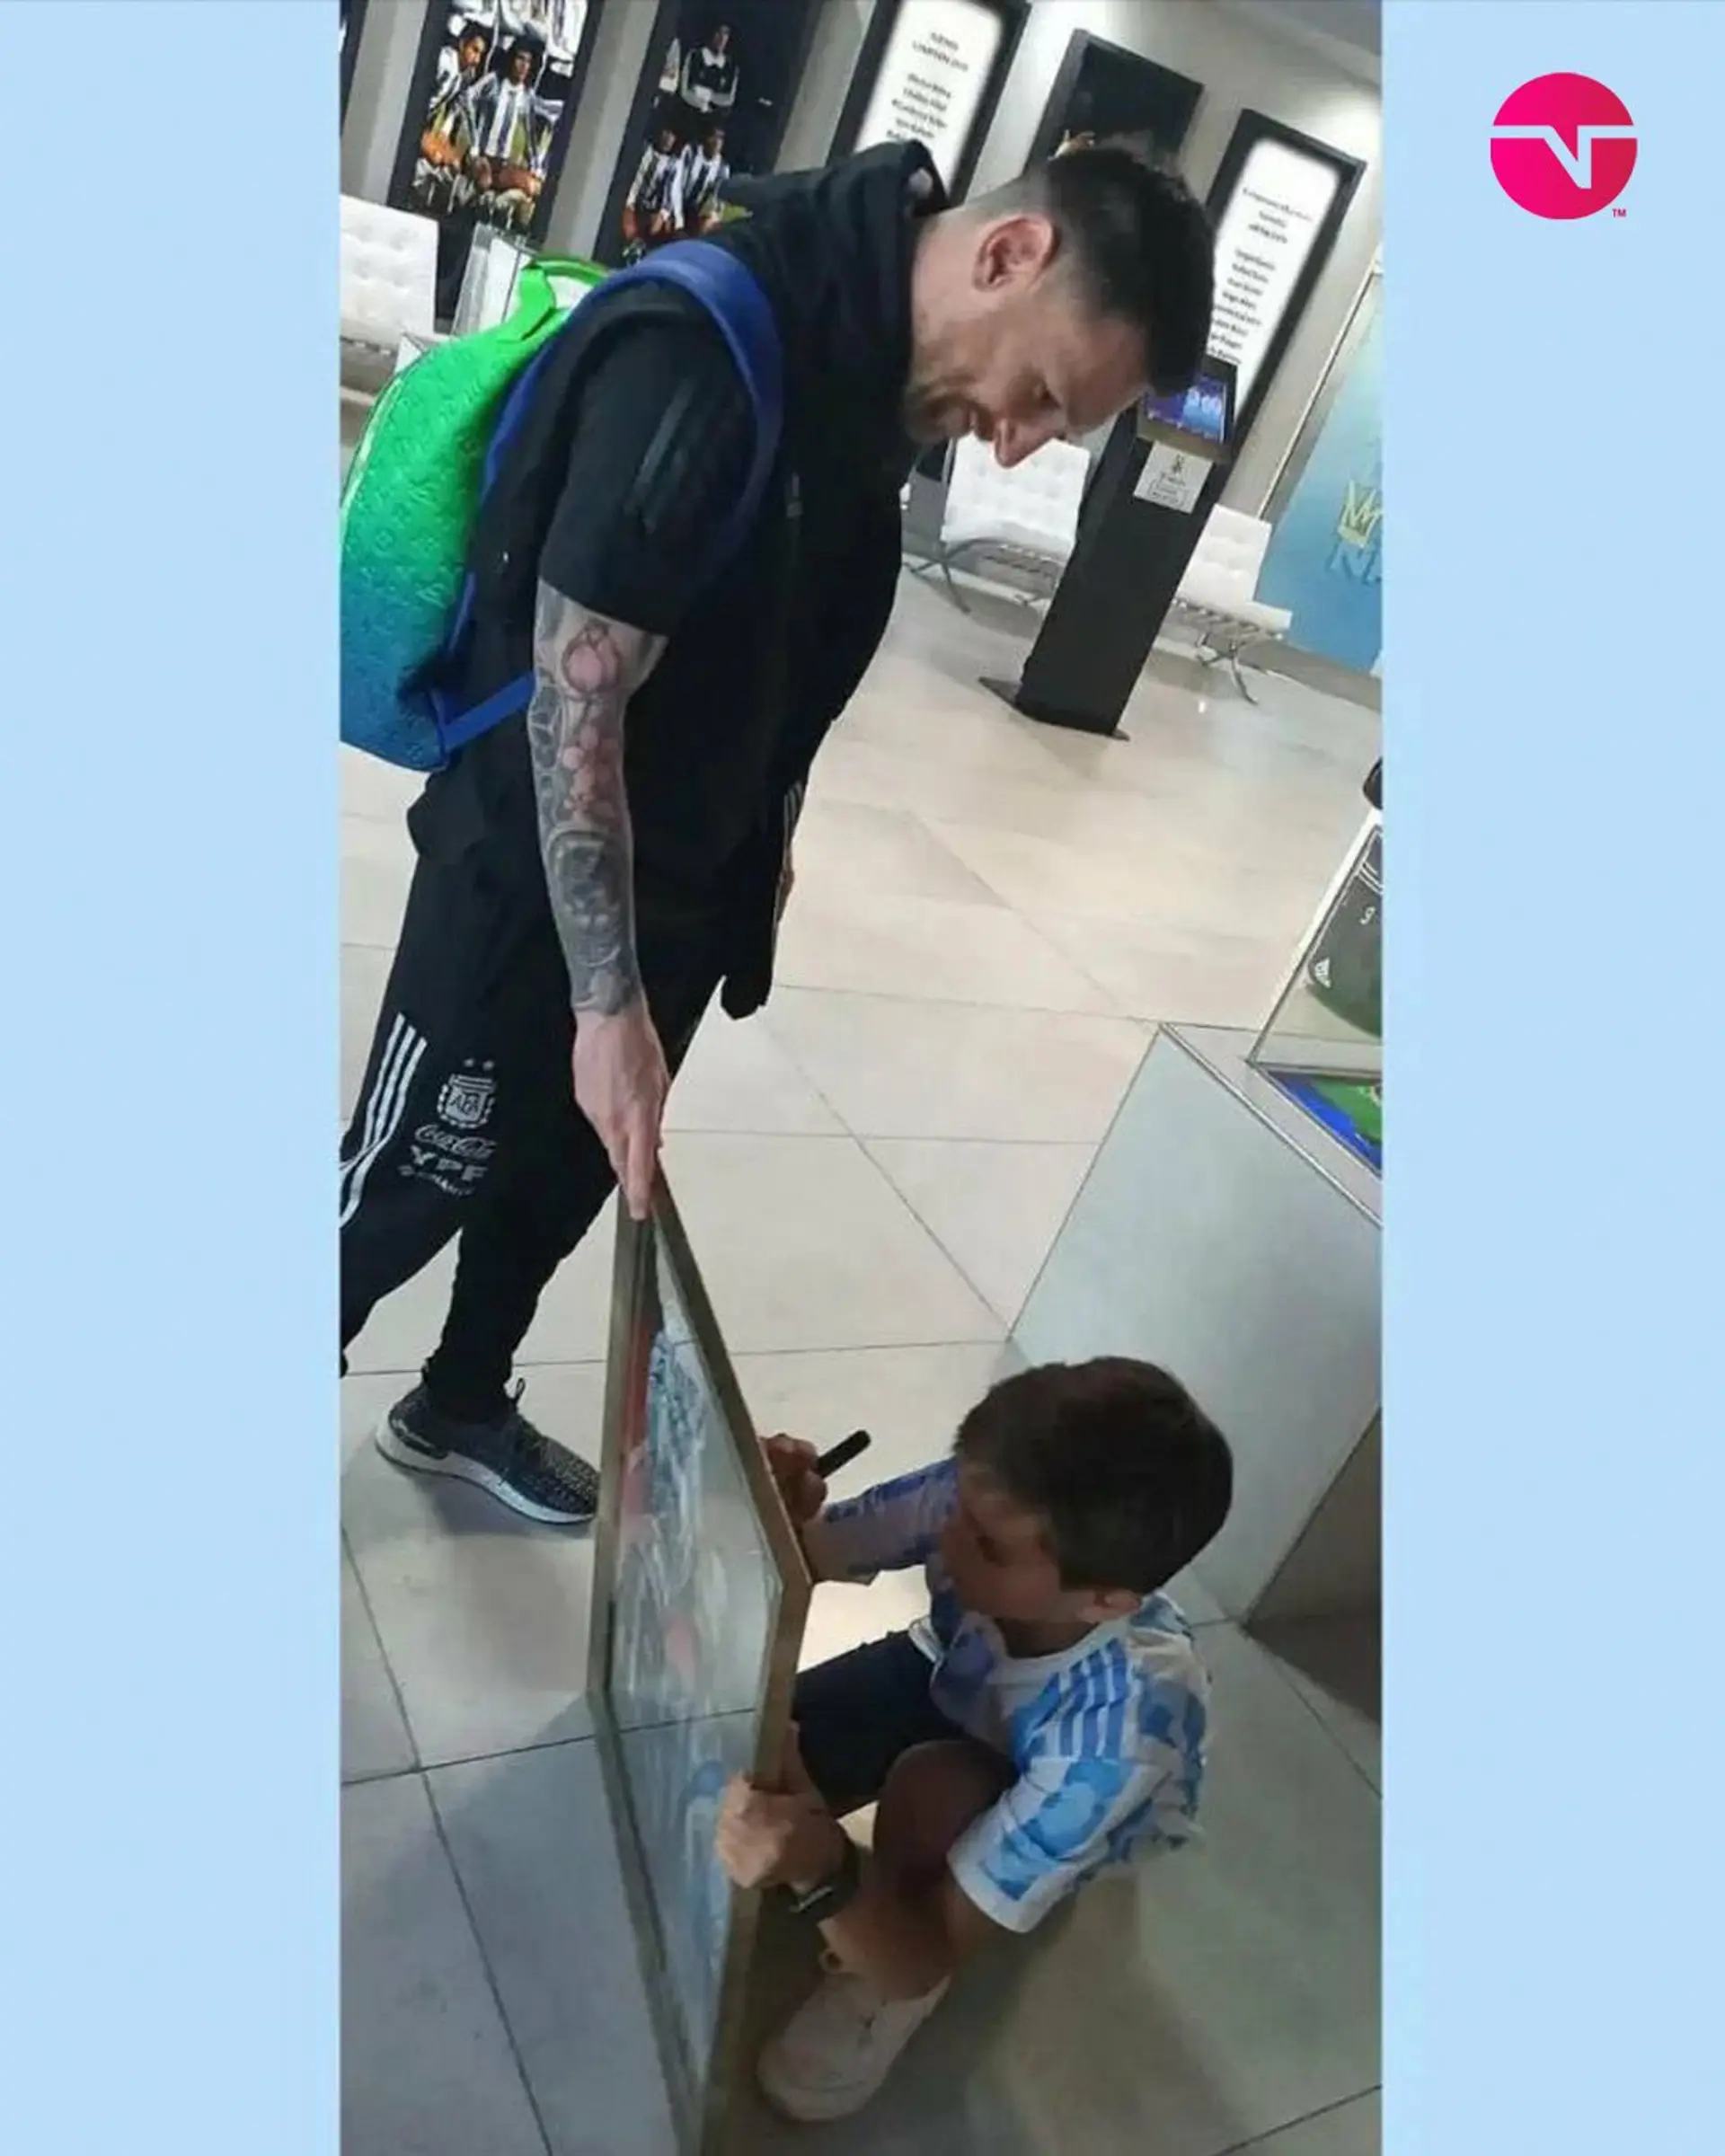 20d26d6d 64c7 4547 bf12 7ed4891006ee?width=1920&quality=75 'Did you seriously do it yourself?': Messi receives special gift from young fan